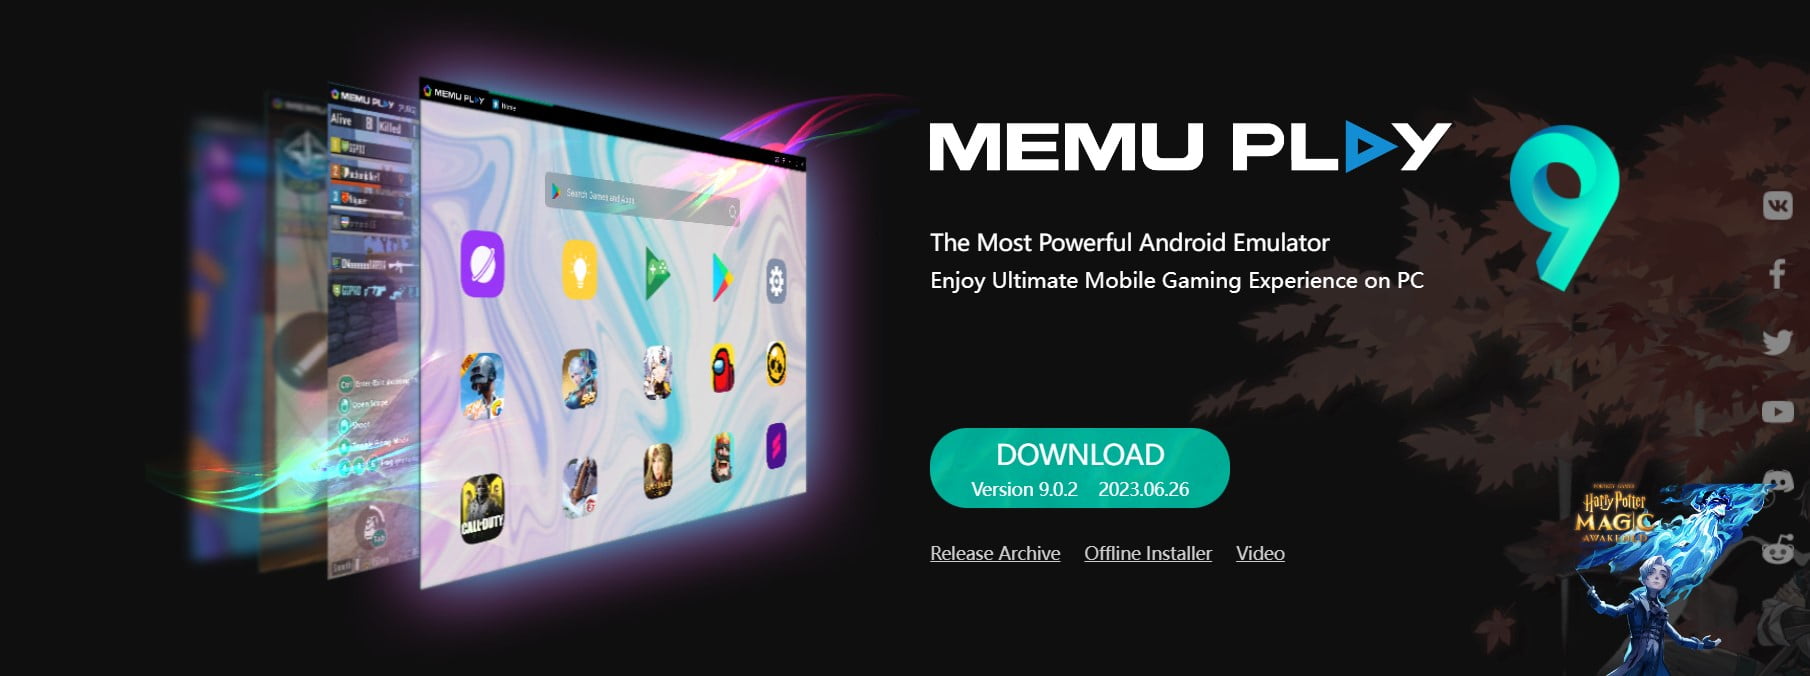 best android emulator for PC